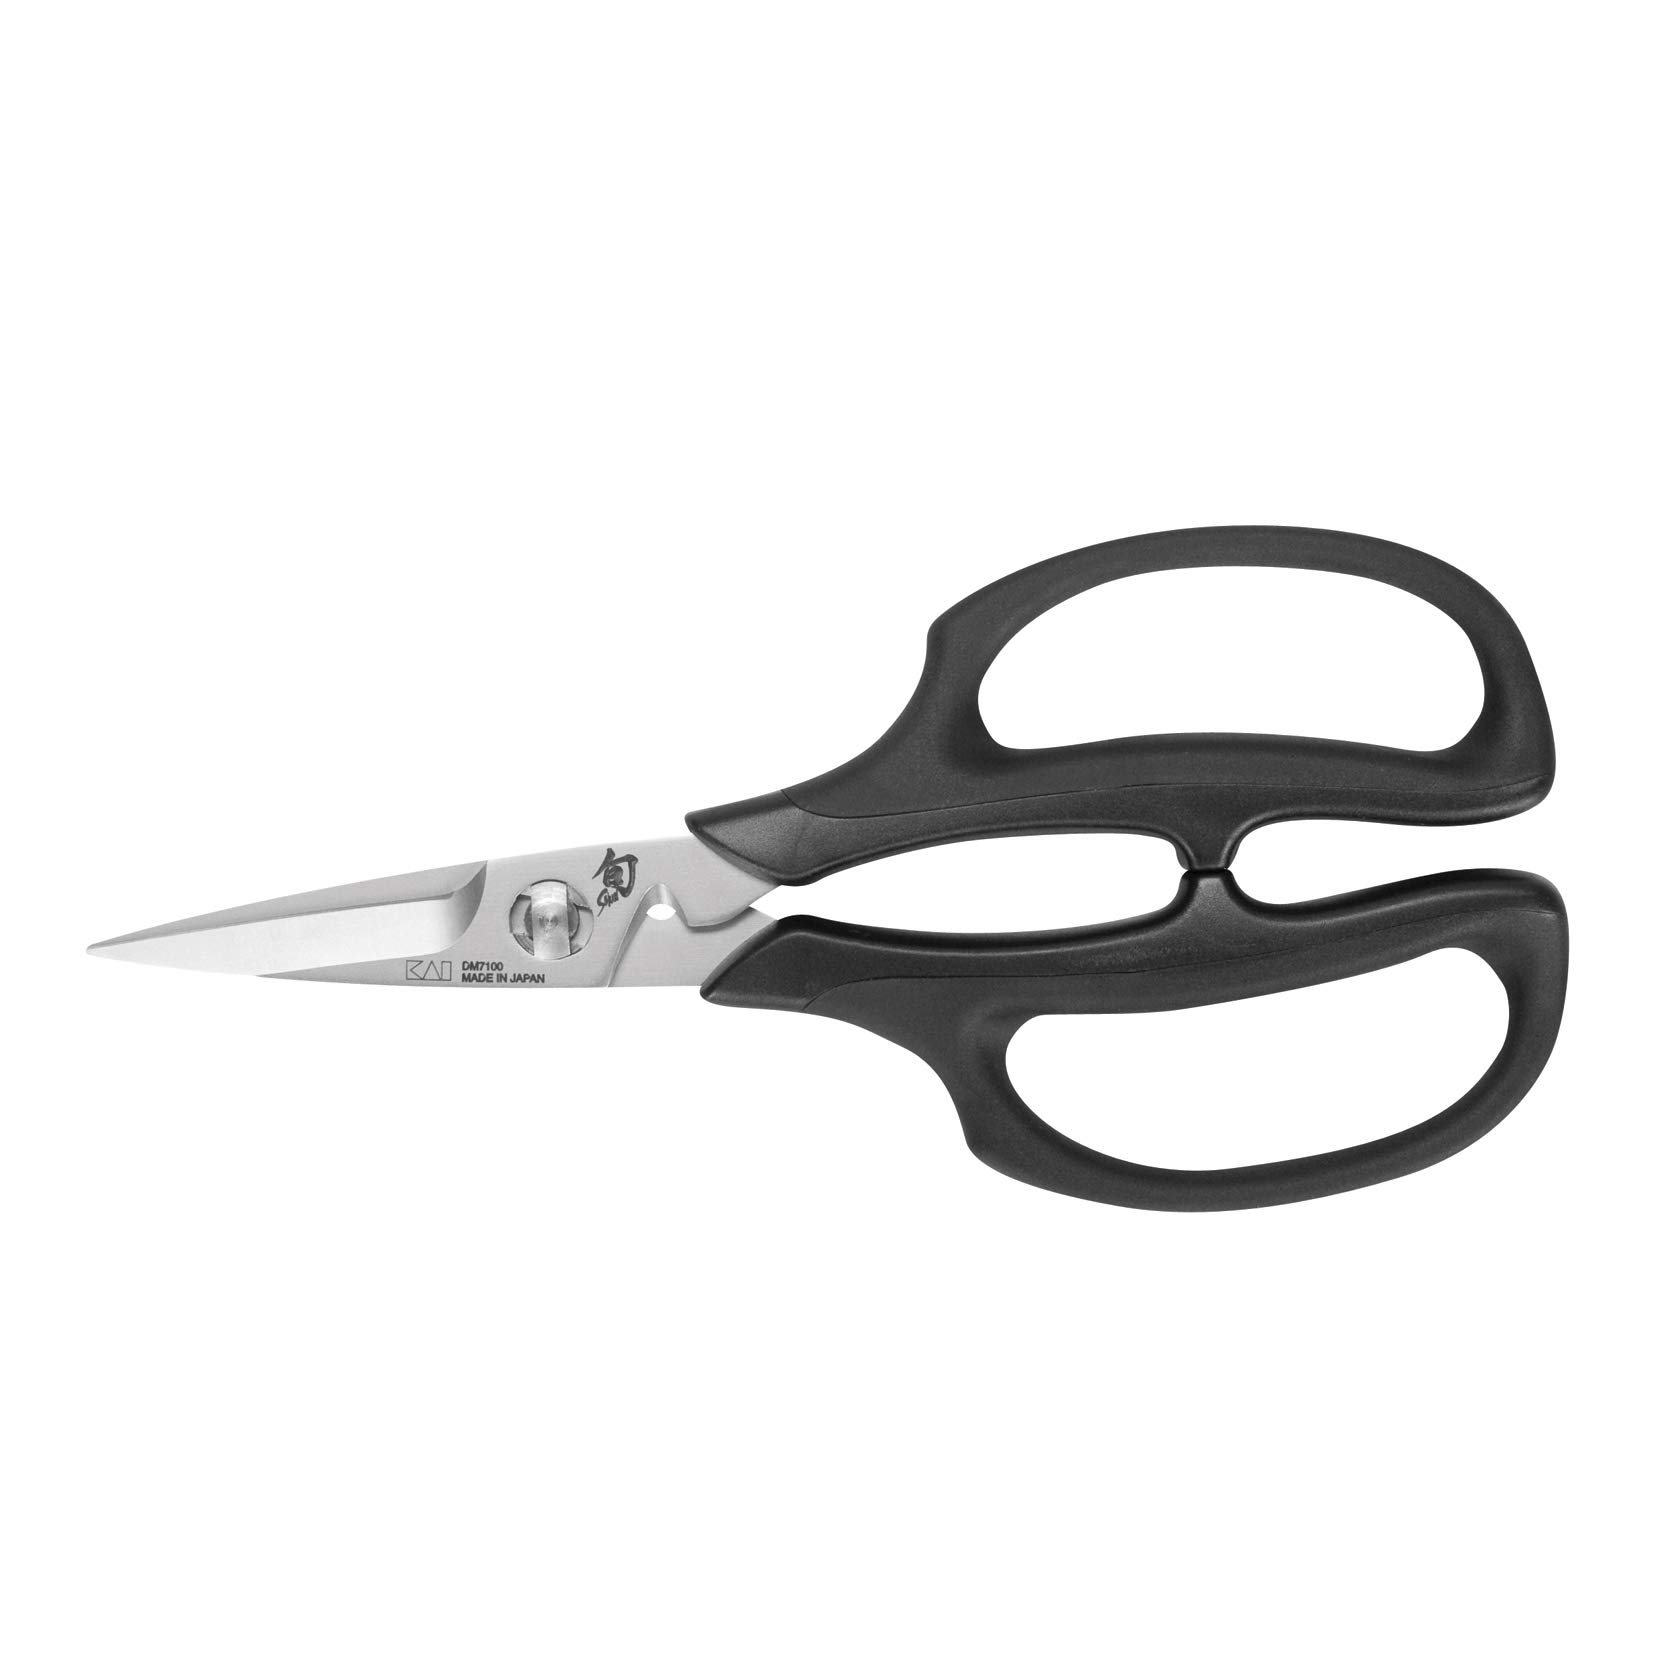 7.5" Shun Cutlery Herb Shears (Stainless Steel) $17 + Free Shipping w/ Prime or on $35+